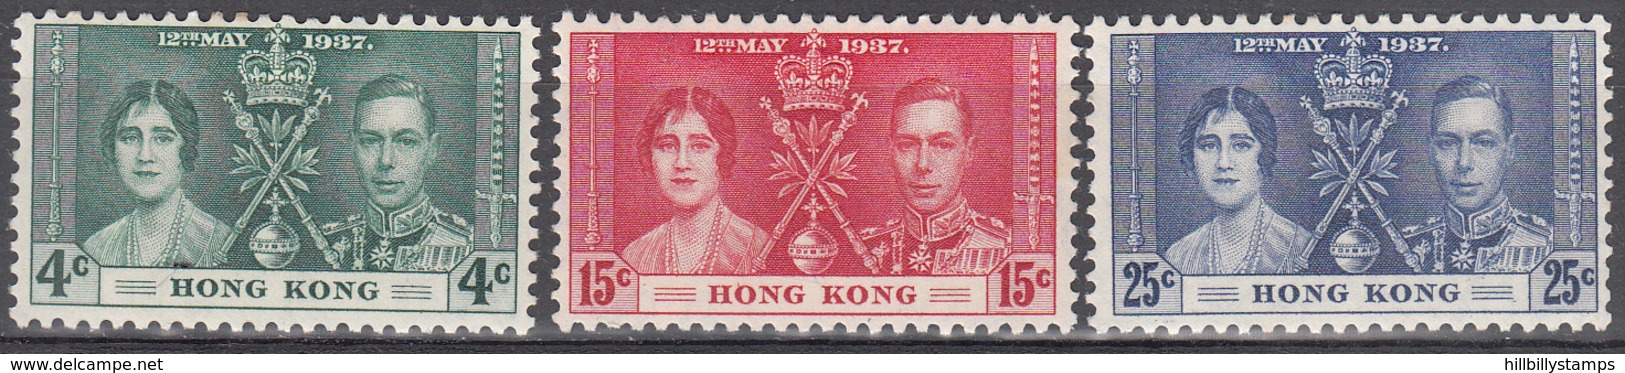 HONG KONG    SCOTT NO. 151-53      MINT HINGED     YEAR  1937 - Unused Stamps